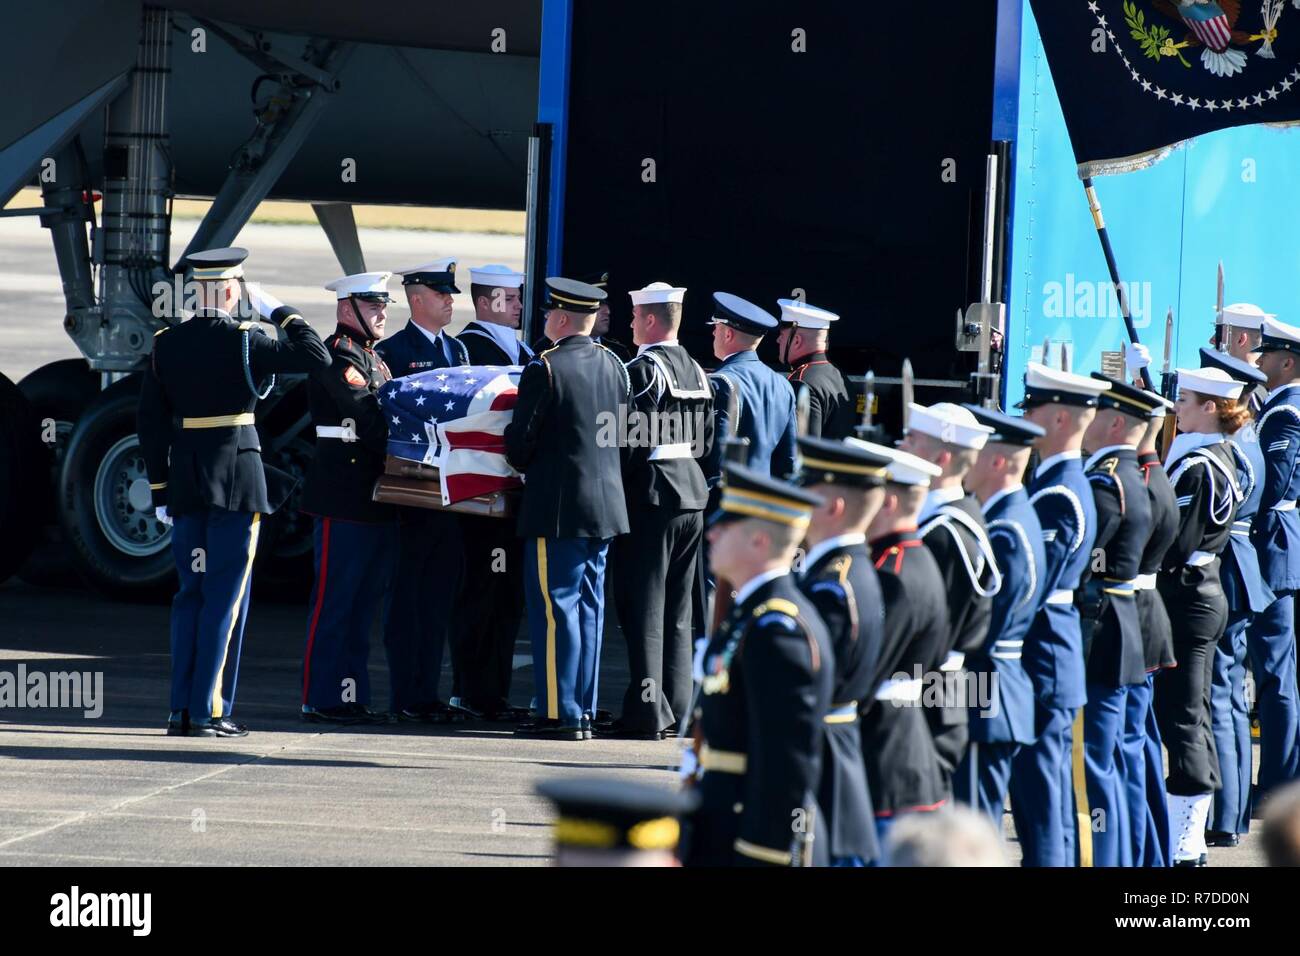 U.S. service members of the joint forces honor guard provide military honors during the departure of former President George H. W. Bush, the 41st President of the United States, from Ellington Field Joint Reserve Base, Texas Dec. 03, 2018. Nearly 4,000 military and civilian personnel from across all branches of the U.S. armed forces, including Reserve and National Guard components, provided ceremonial support during George H. W. Bush’s, the 41st President of the United States state funeral. (Air National Guard Stock Photo